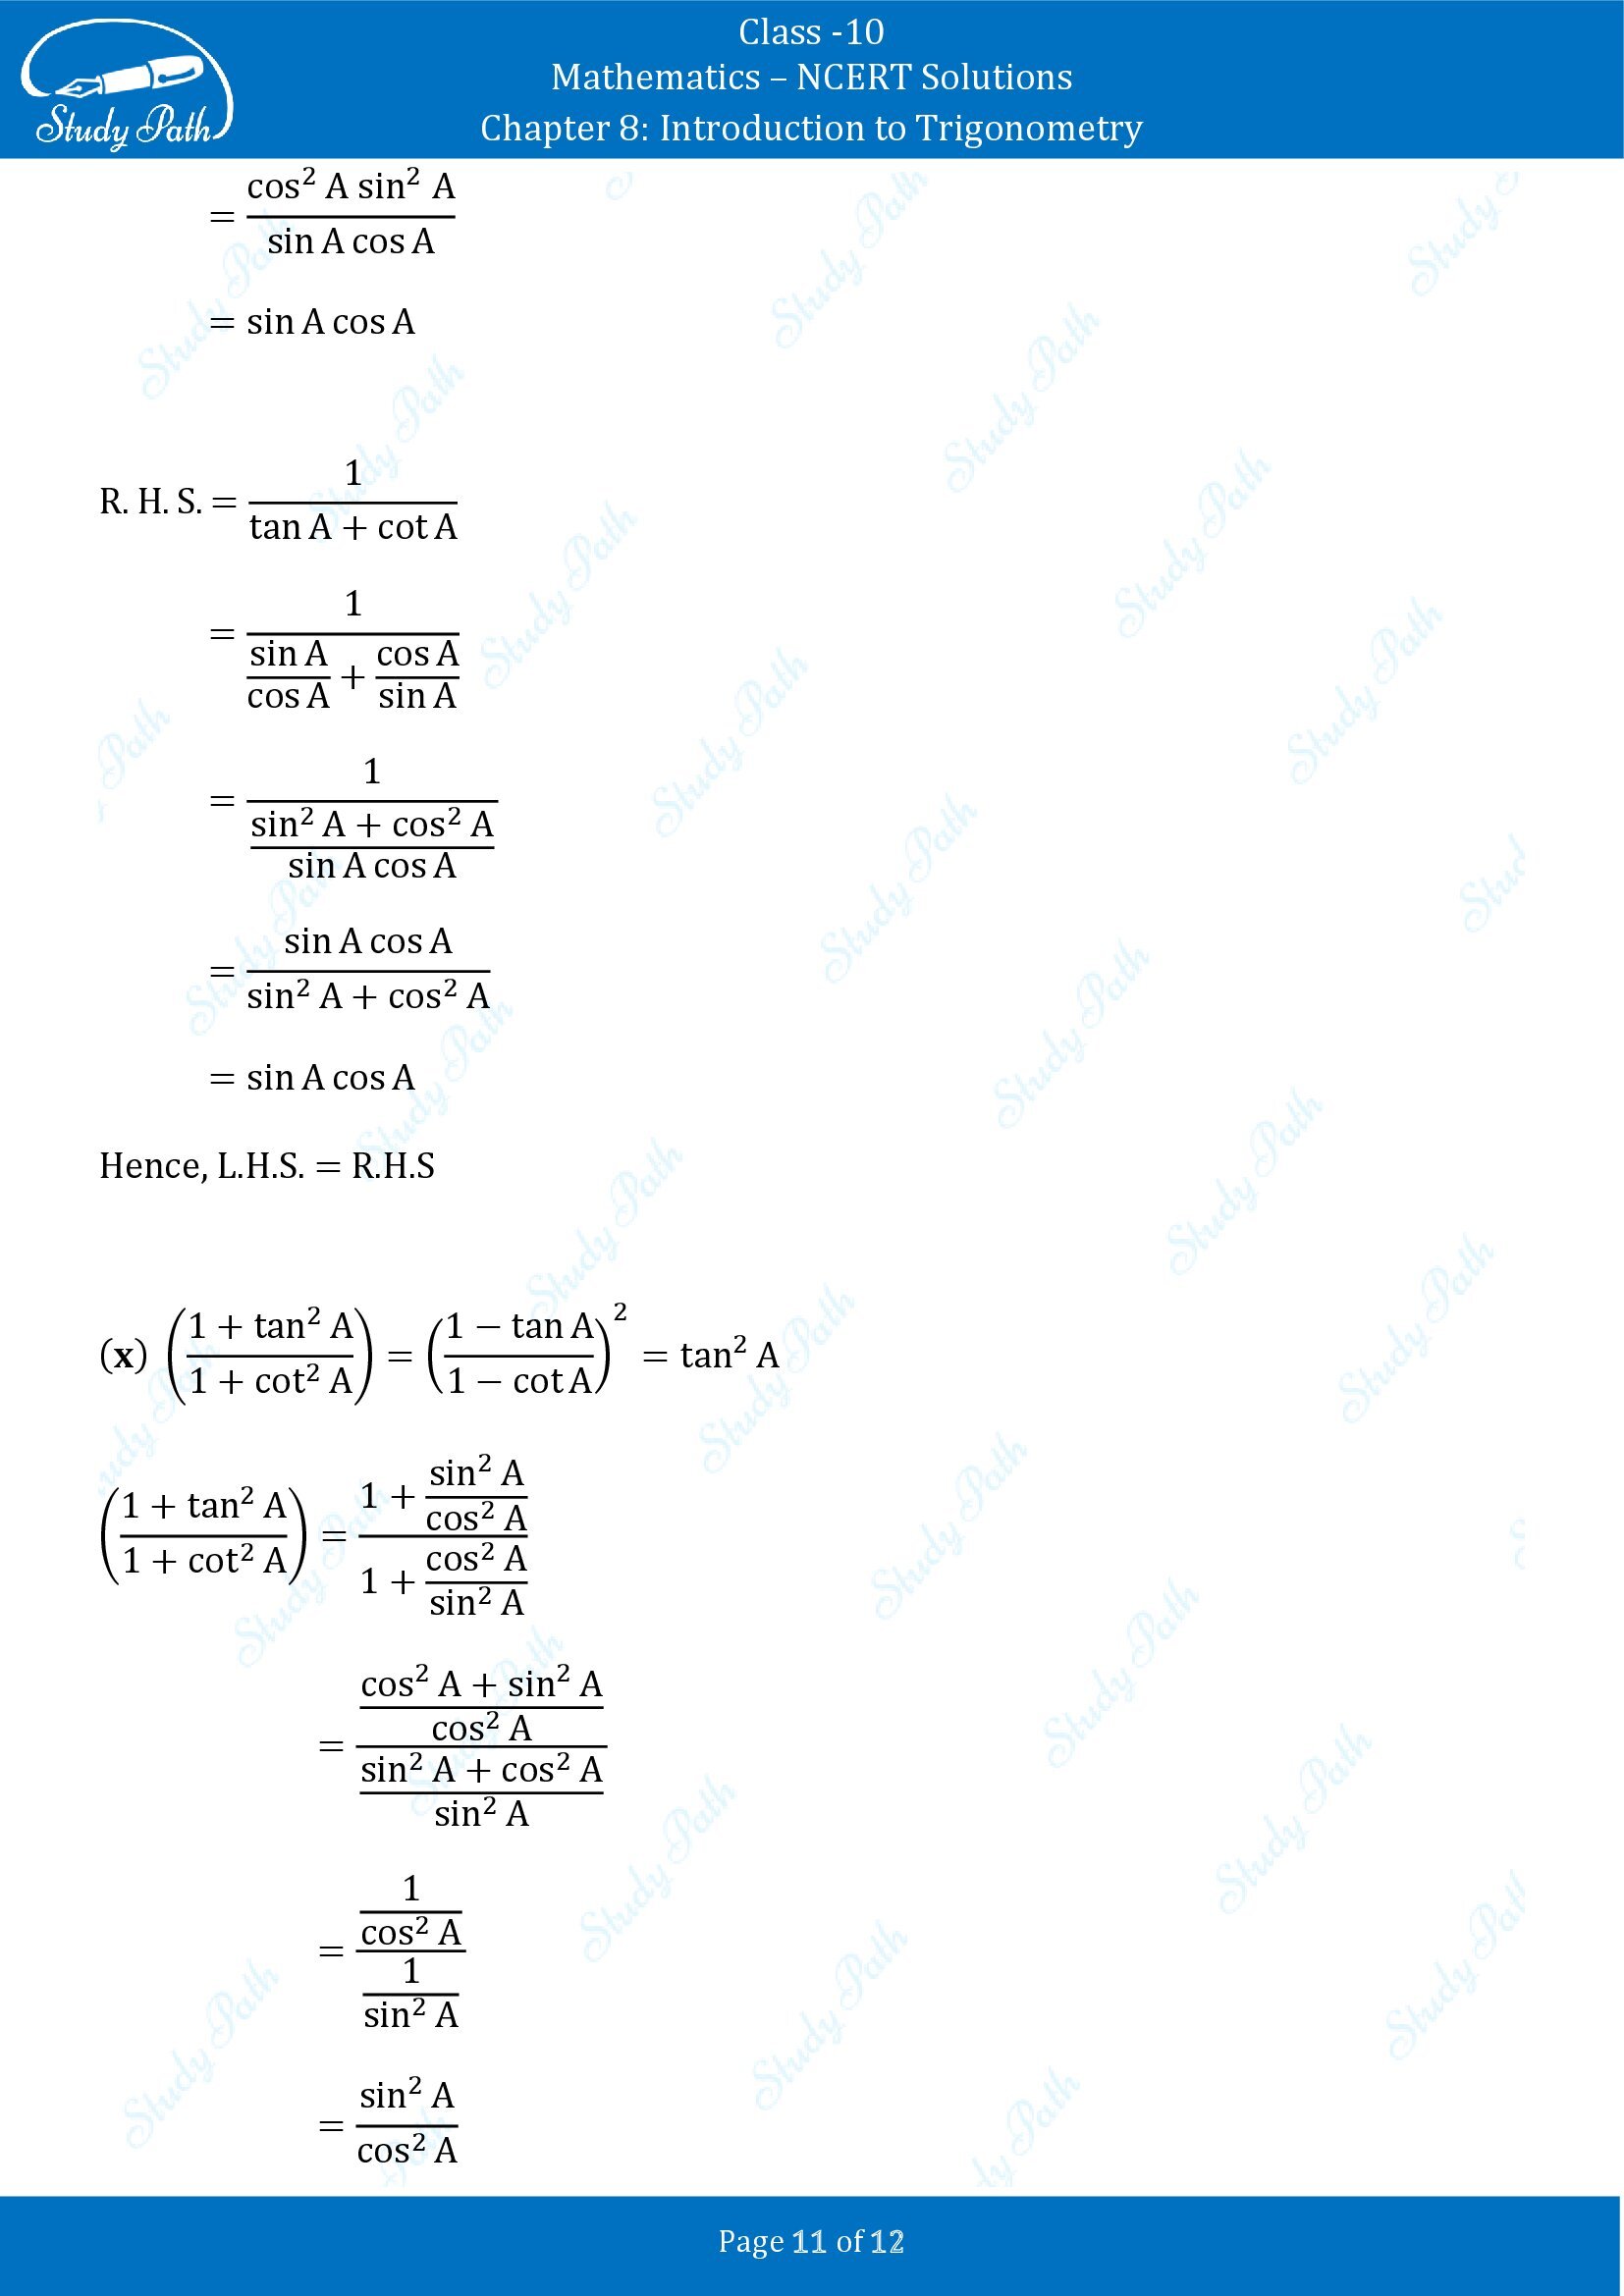 NCERT Solutions for Class 10 Maths Chapter 8 Introduction to Trigonometry Exercise 8.4 00011